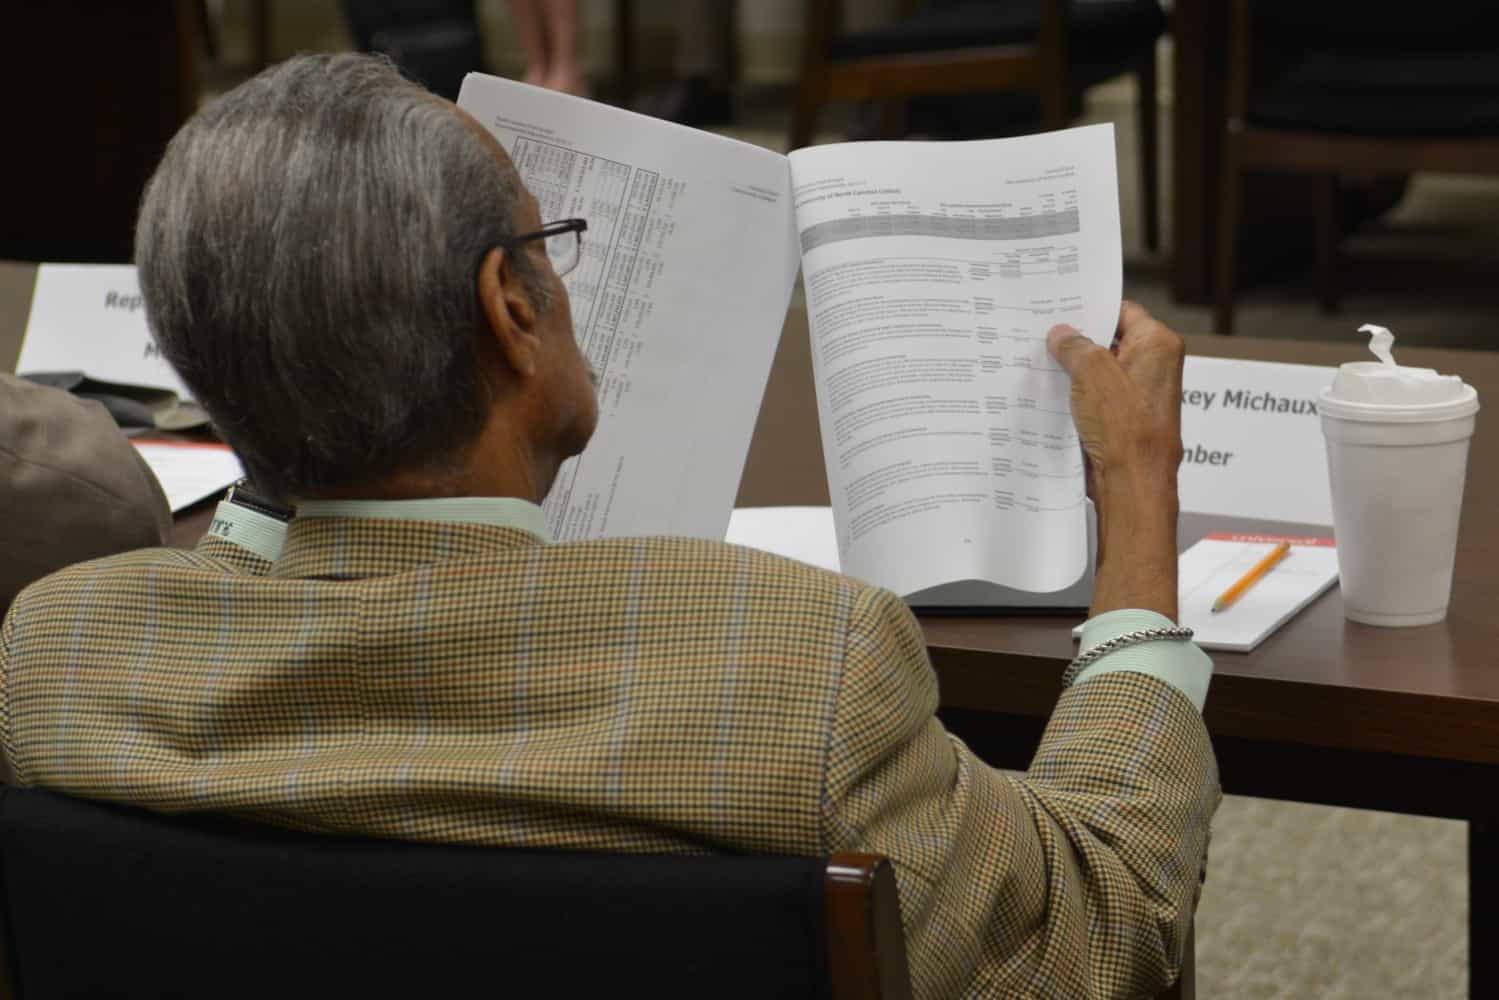 Rep. Mickey Michaux reads the Governor's budget.